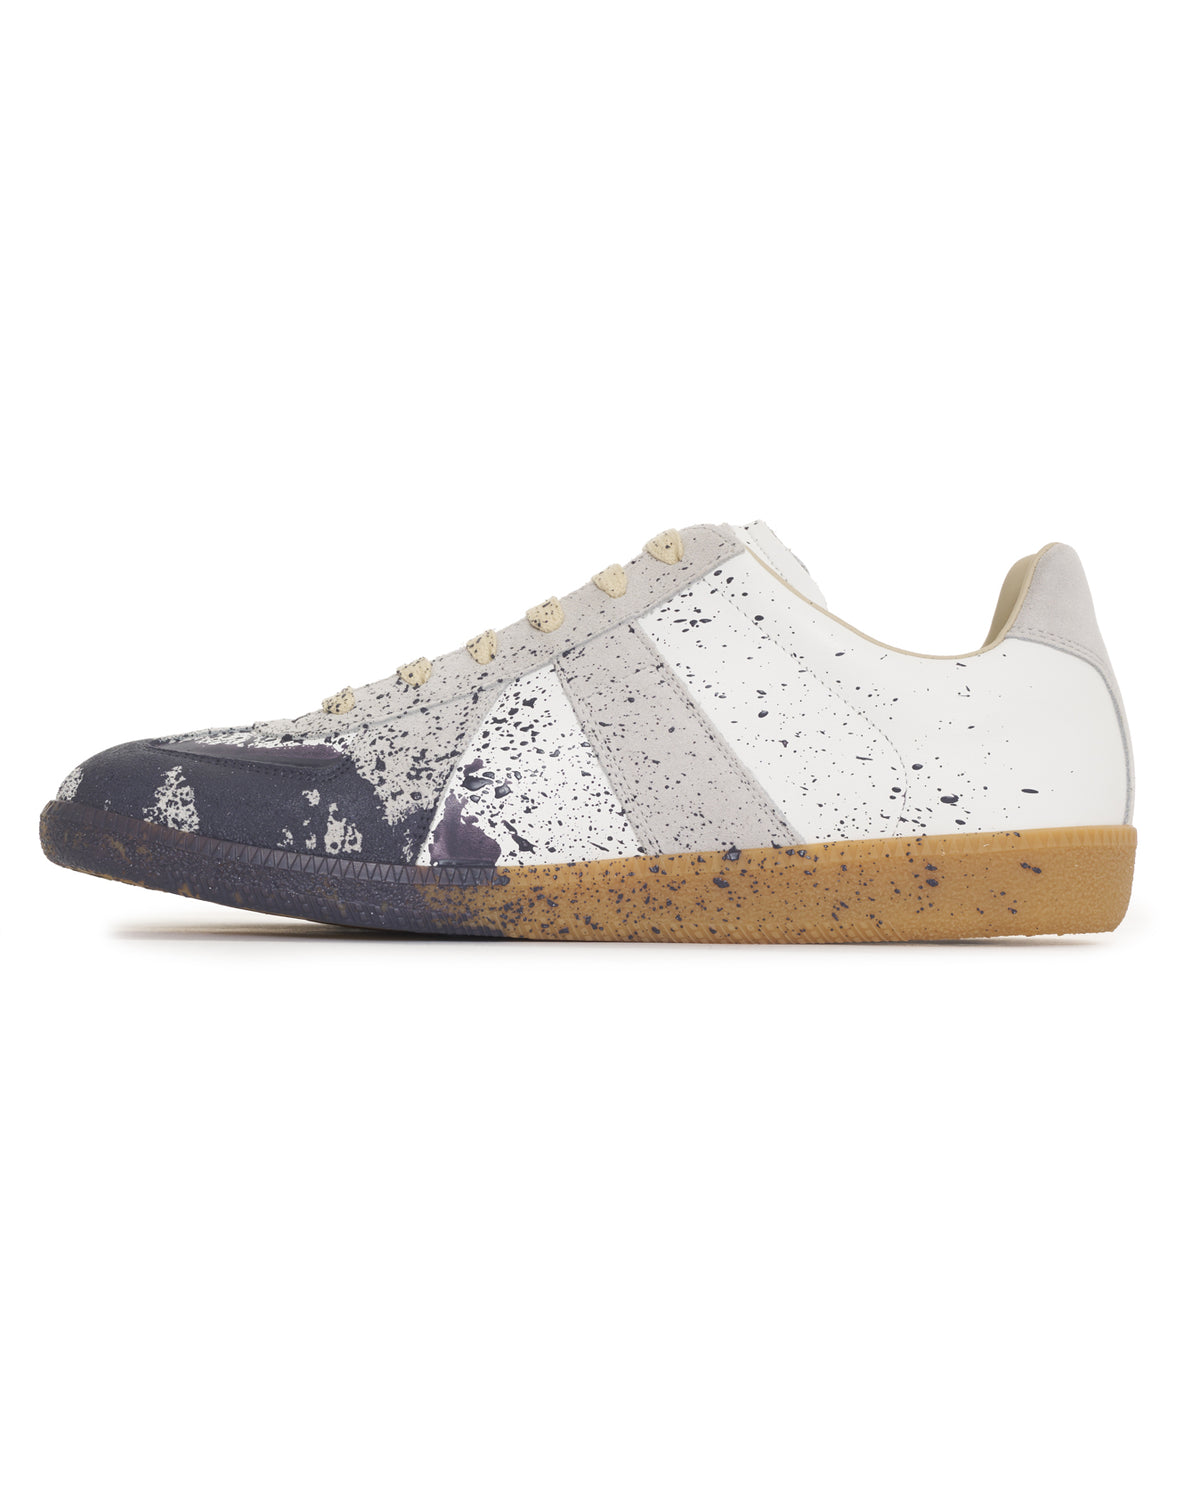 Replica Sneakers With Paint Splatter - White